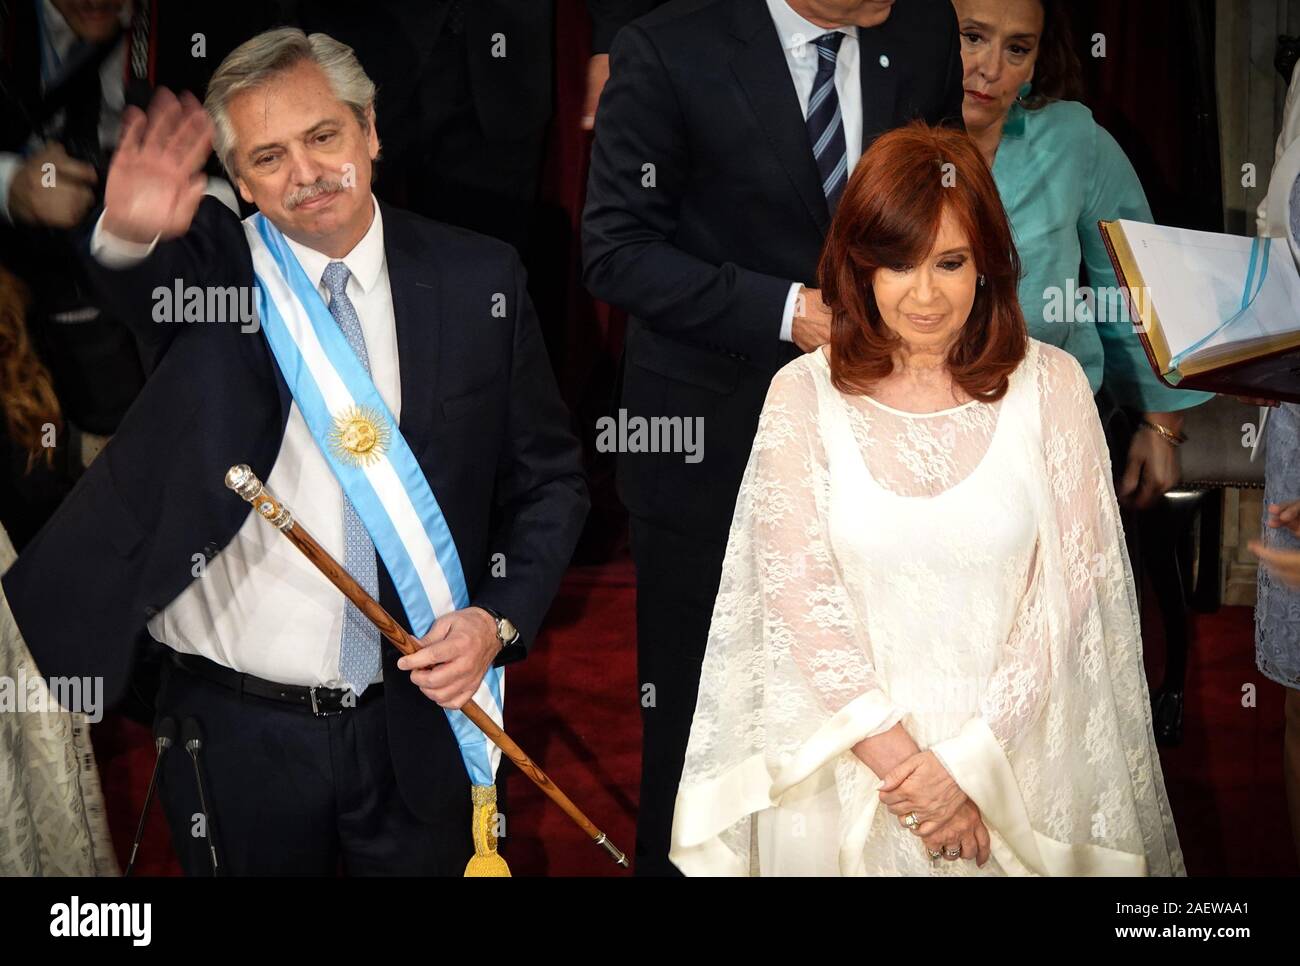 Buenos Aires, Argentina. 10th Dec, 2019. Alberto Fernandez (l), new President of Argentina, and Vice-President Cristina Fernandez de Kirchner stand together after taking the oath of office before the Congress. Credit: Florencia Martin/dpa/Alamy Live News Stock Photo